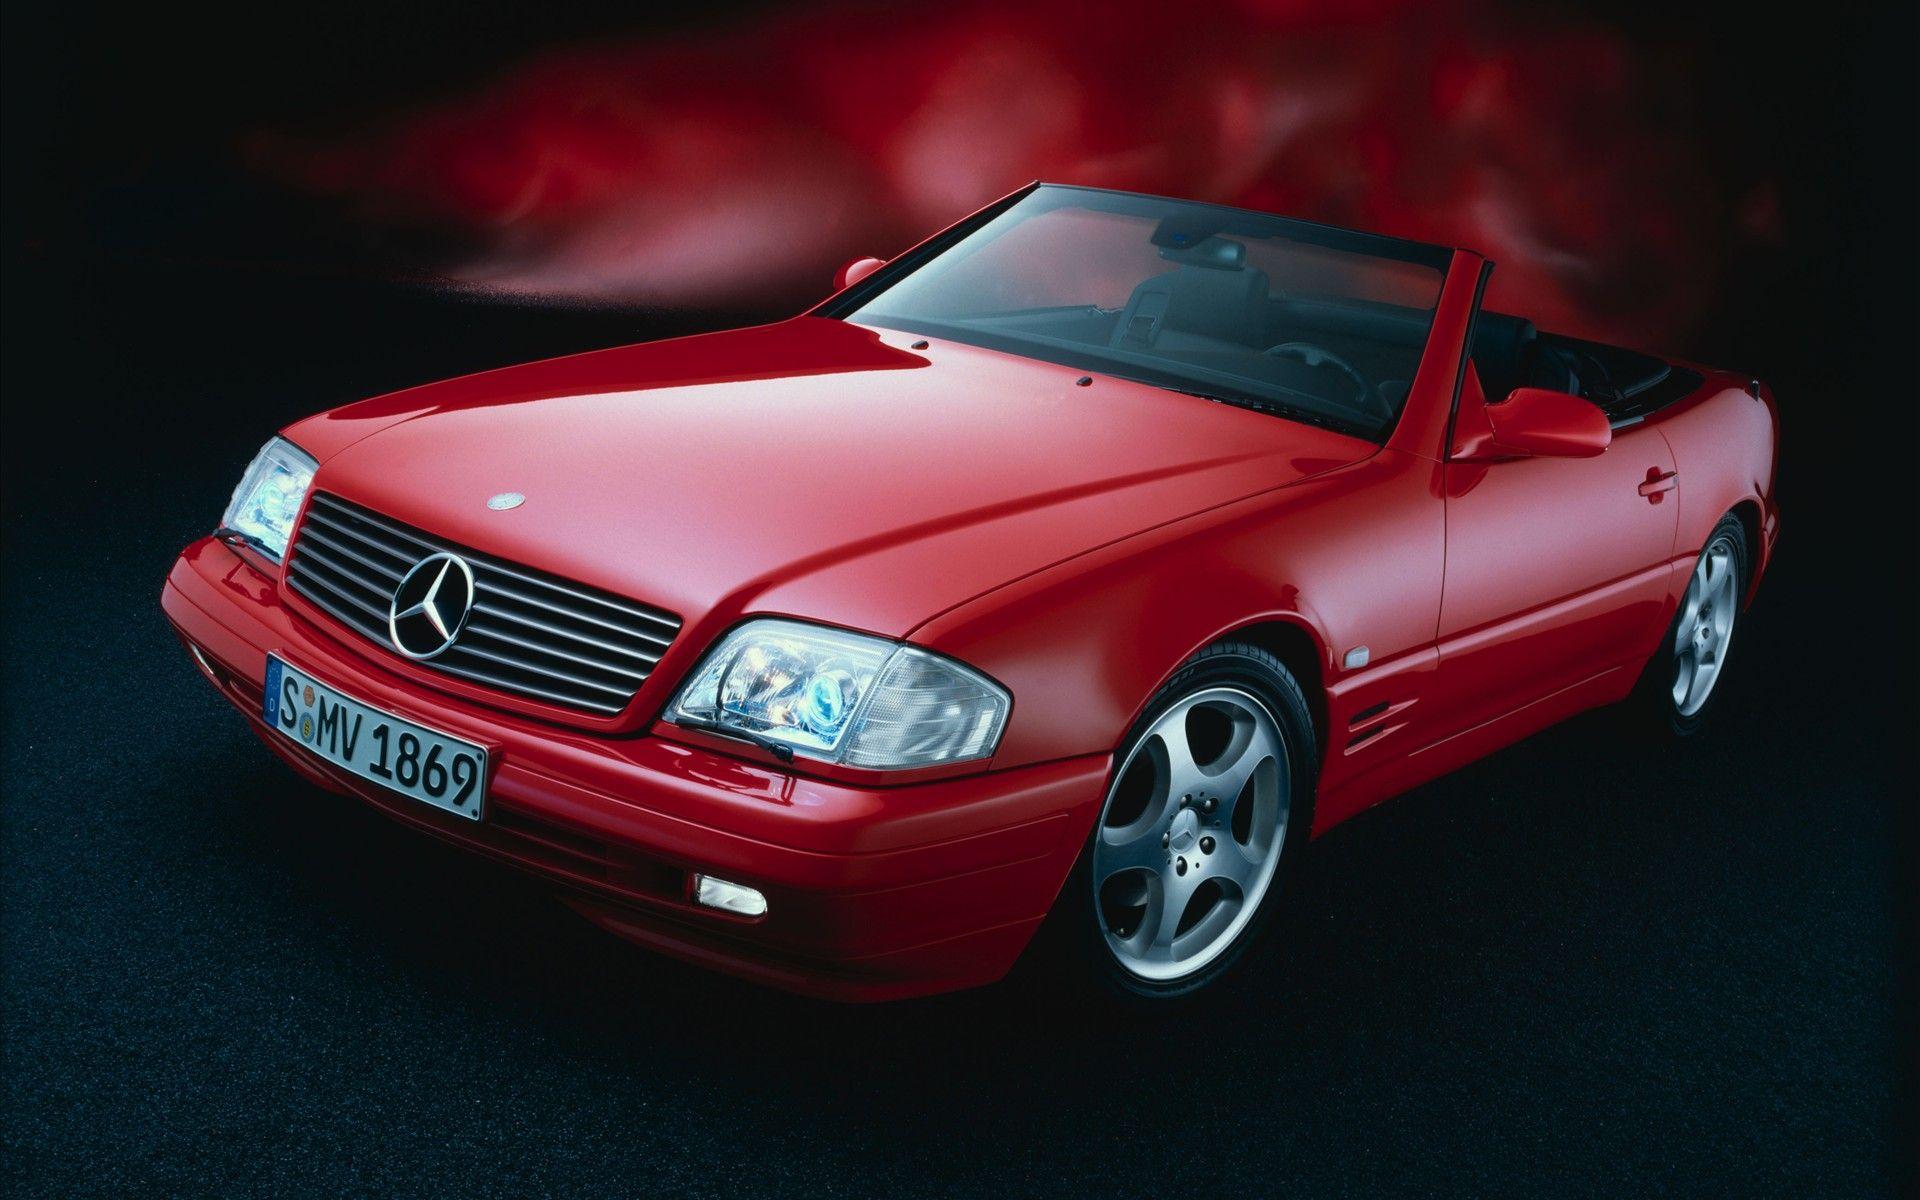 Mercedes Benz SL Class And Photo